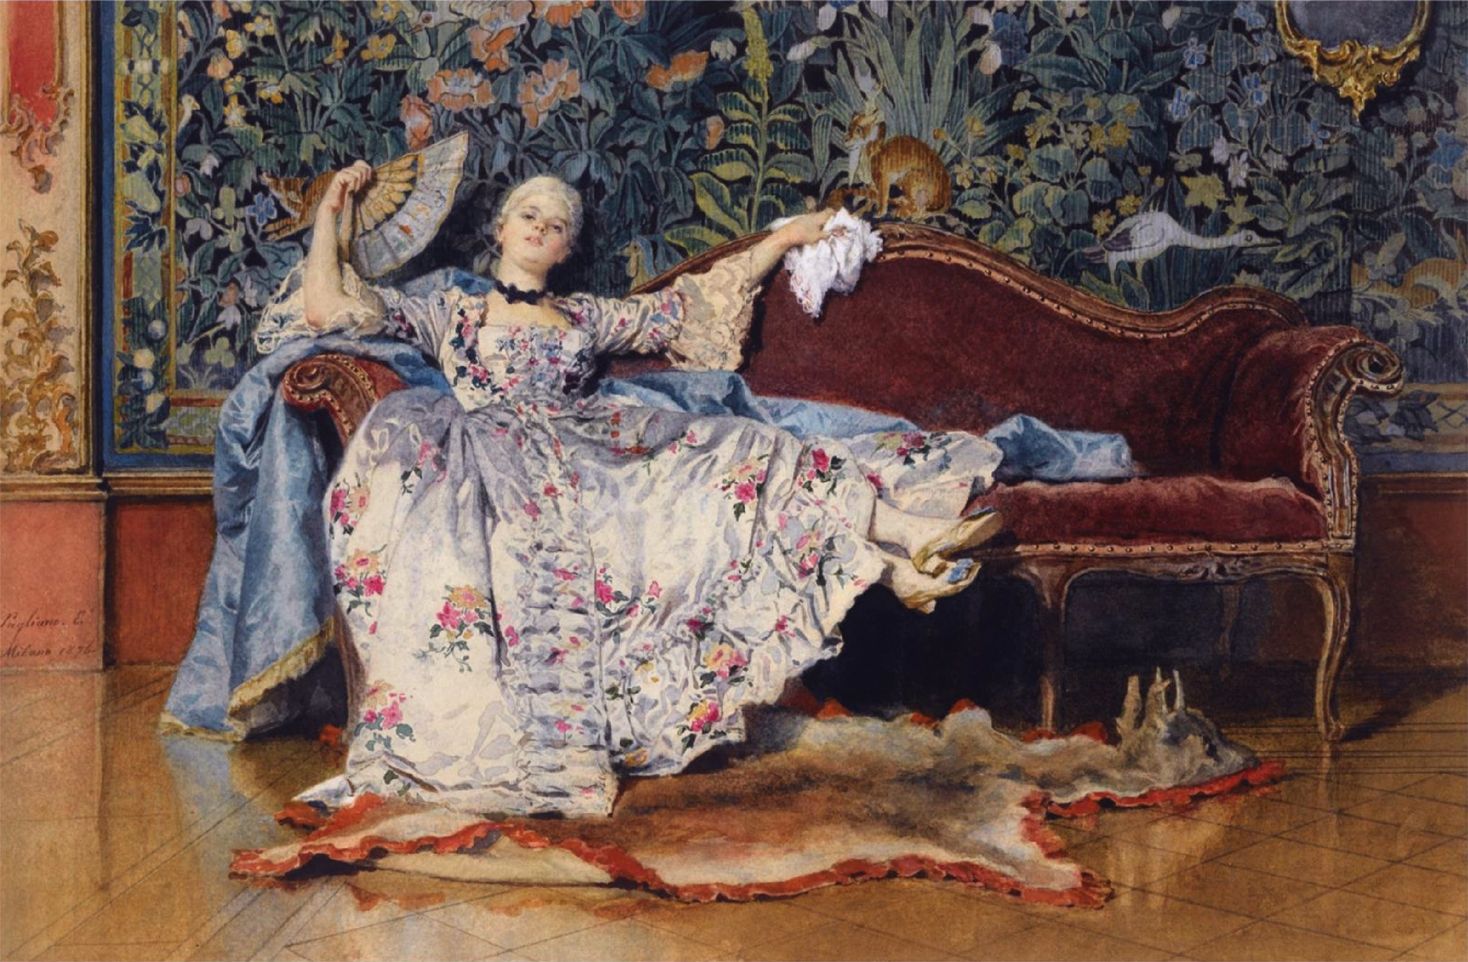 "A Reclining Lady with a Fan," by Eleuterio Pagliano, 1876. Sotheby's, March 2011. 